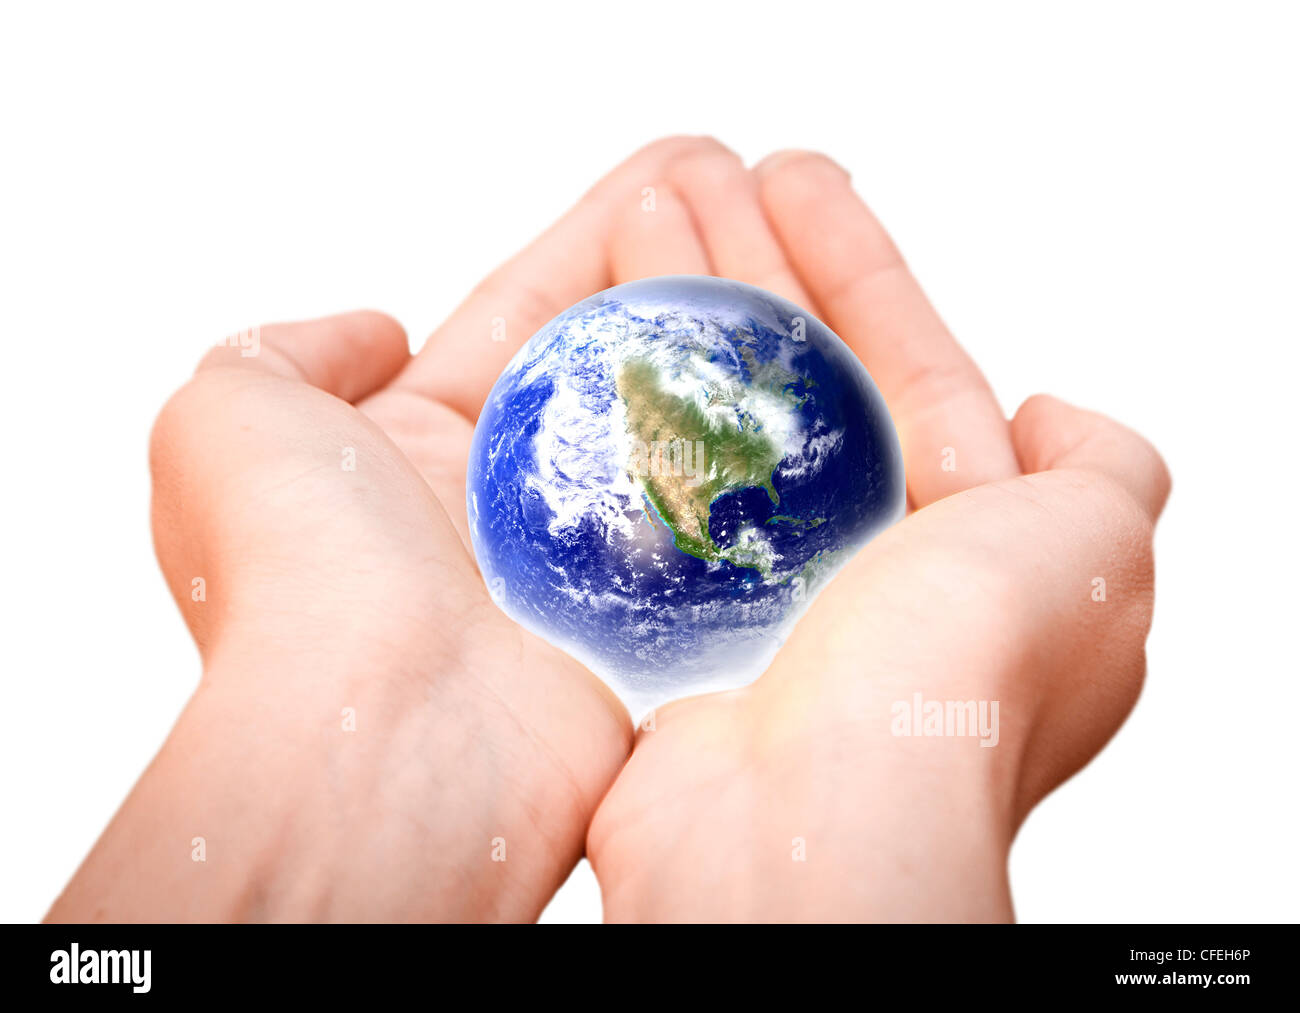 human hands carefully holding Earth planet. Glass World Stock Photo